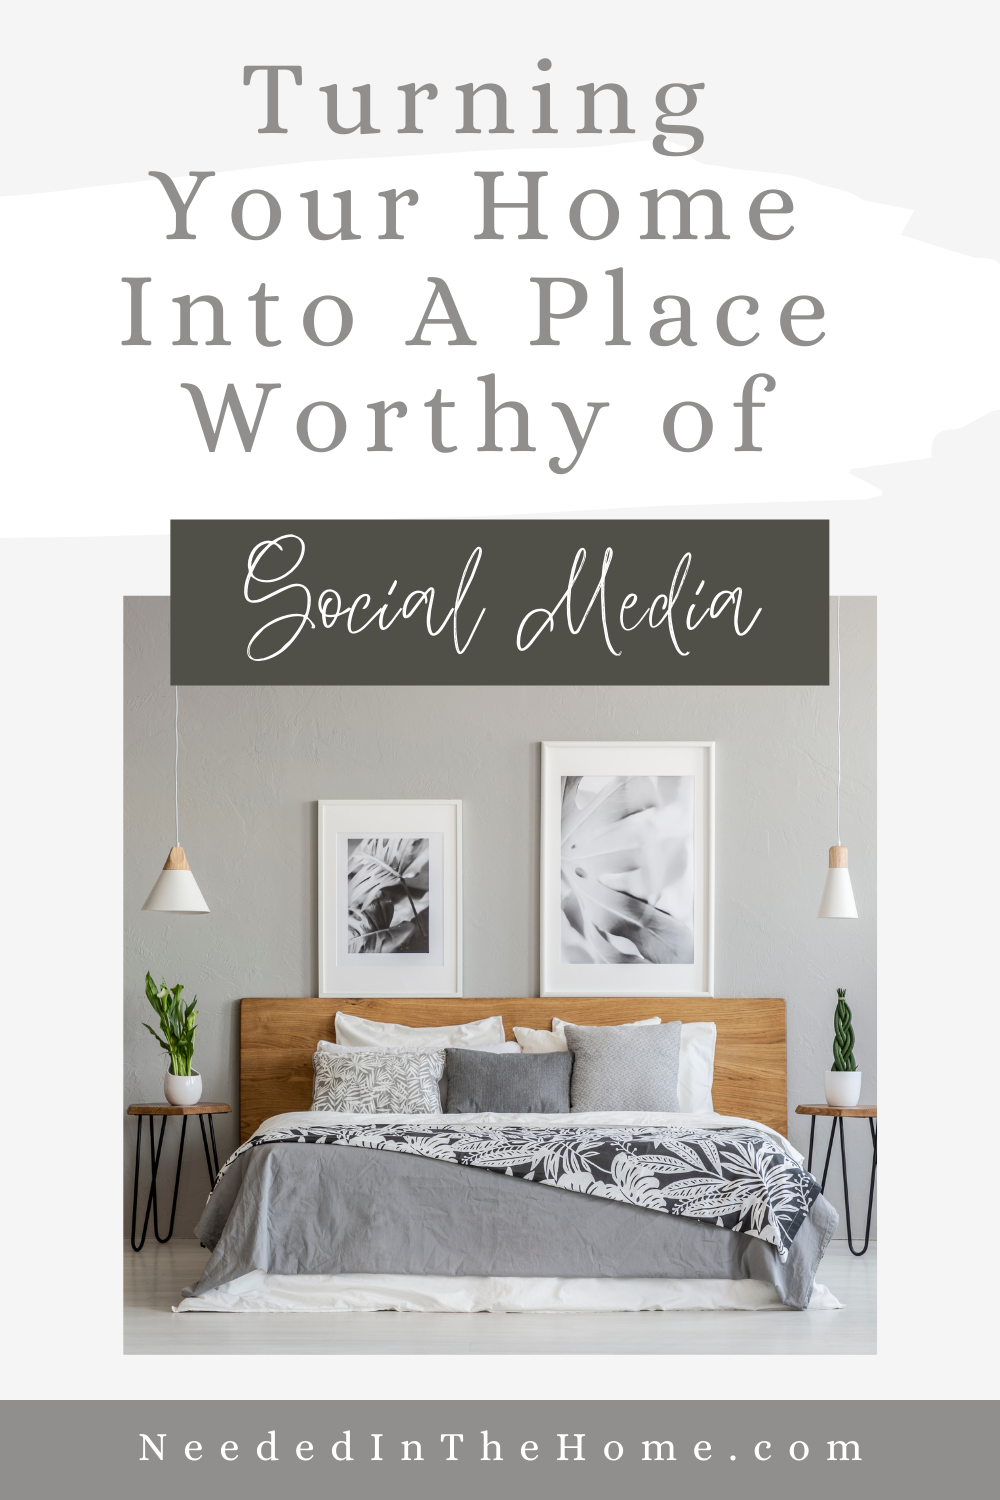 pinterest-pin-description turning your home into a place worthy of social media decorative bedroom wall art above king size bed pillow shams duvet plants side tables neededinthehome